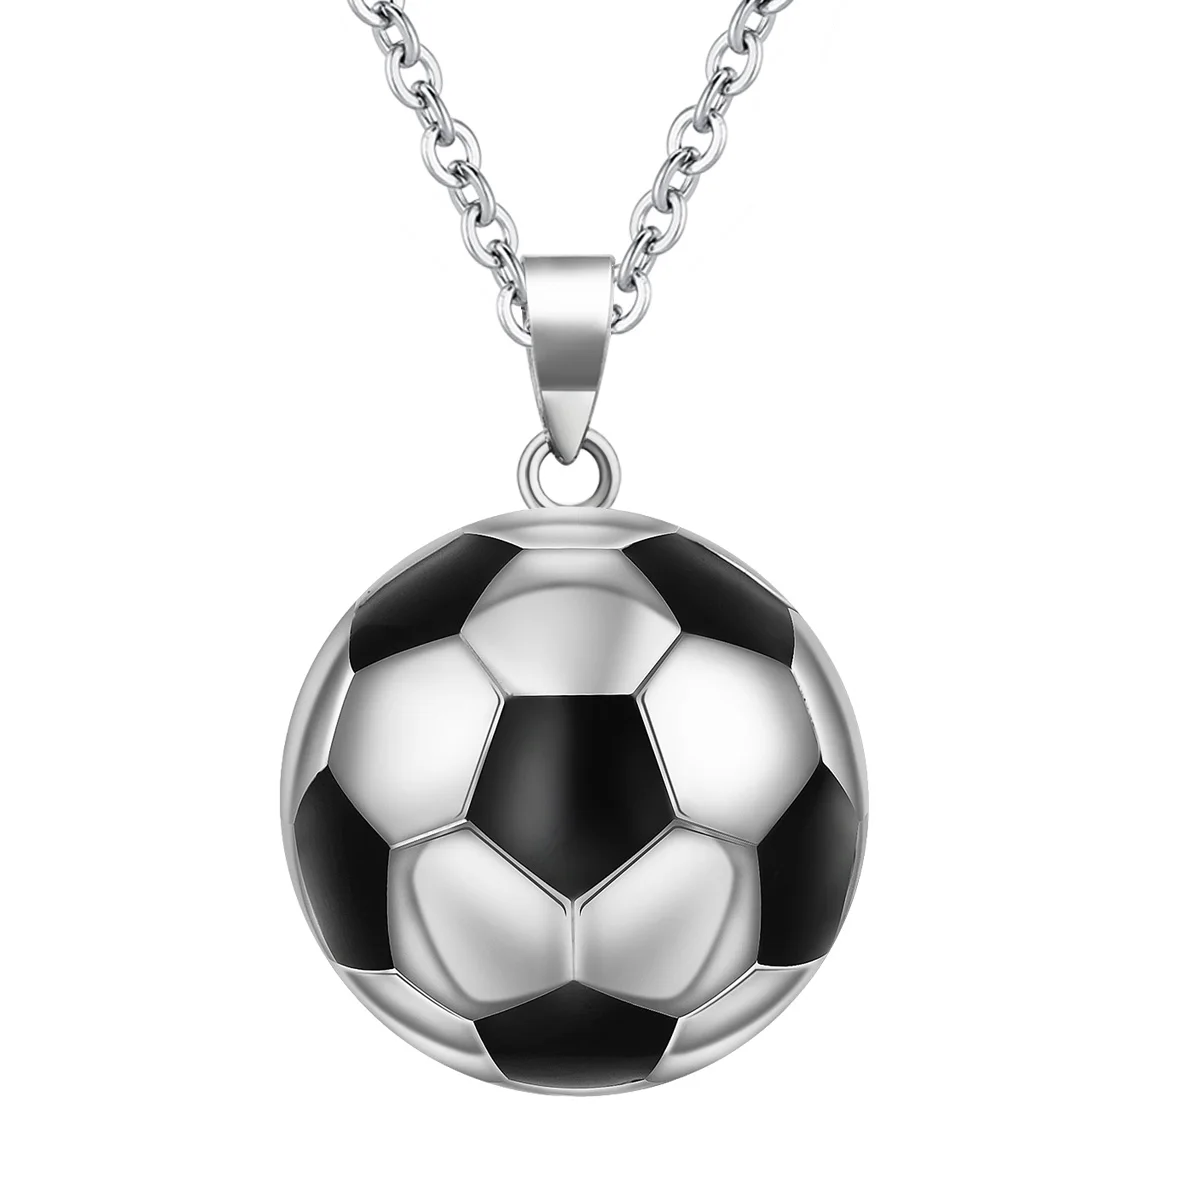 

Mexican Bola Ball Angel Caller Football Pregnancy Pendant Necklace for Women Jewelry